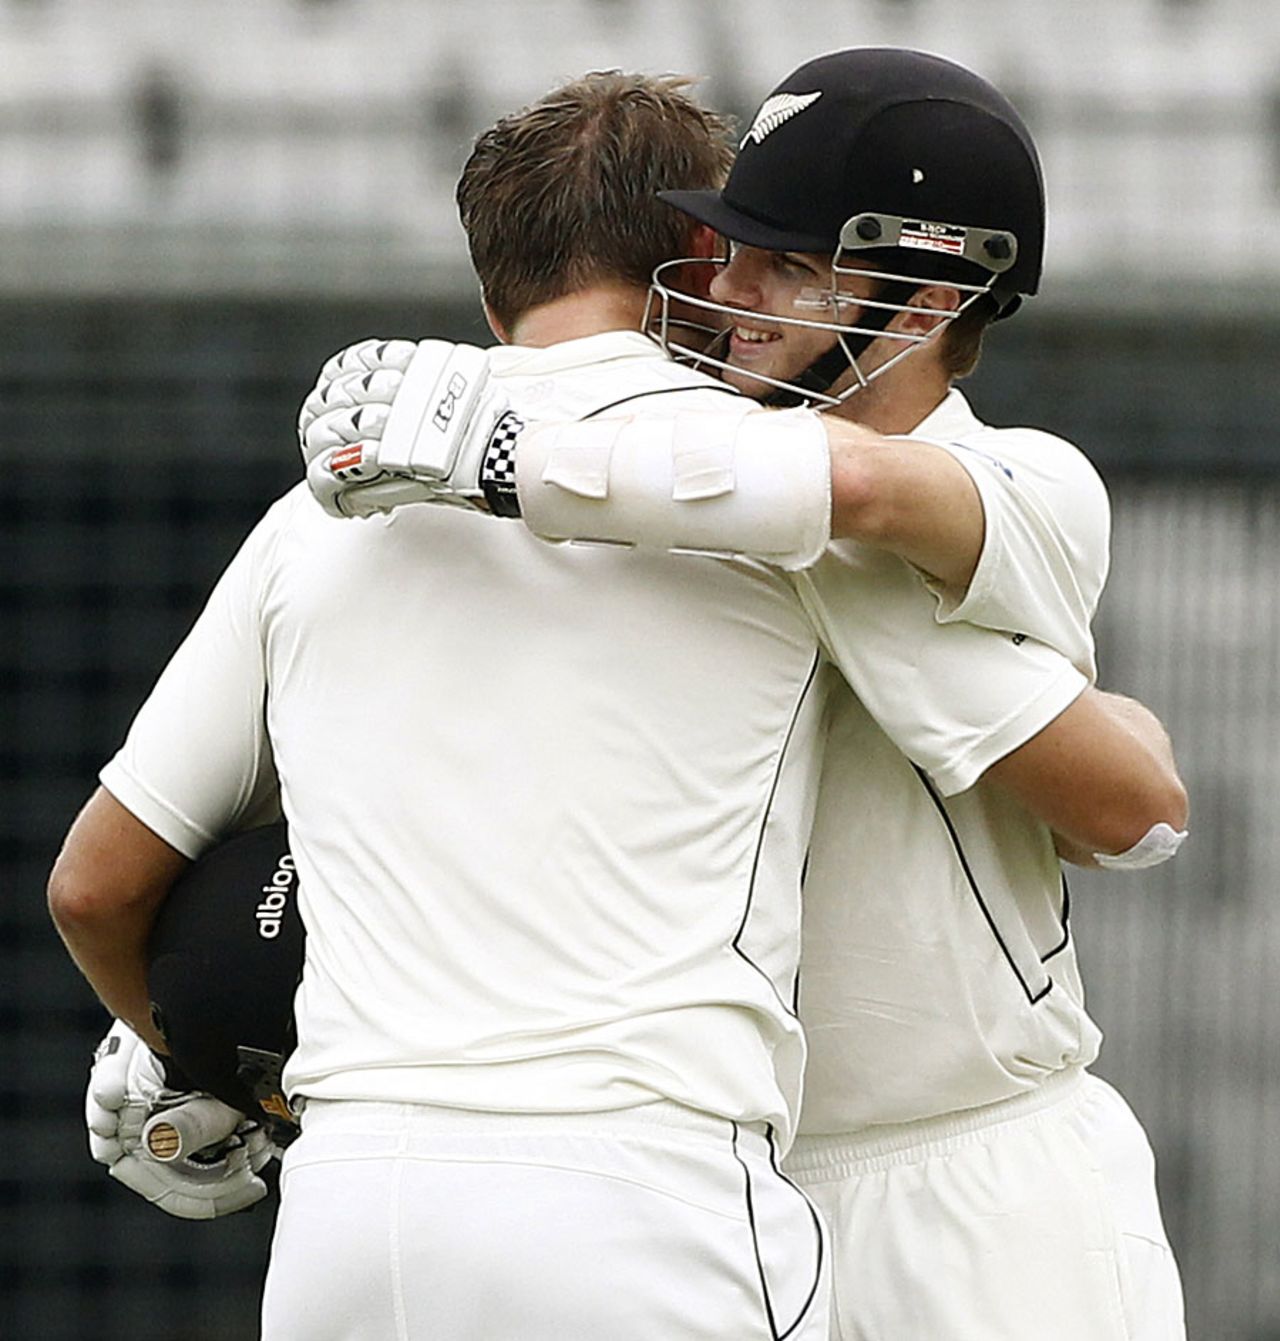 Kane Williamson hugs Corey Anderson after the latter scored his first Test century, Bangladesh v New Zealand, 2nd Test, 3rd day, Mirpur, October 23, 2013